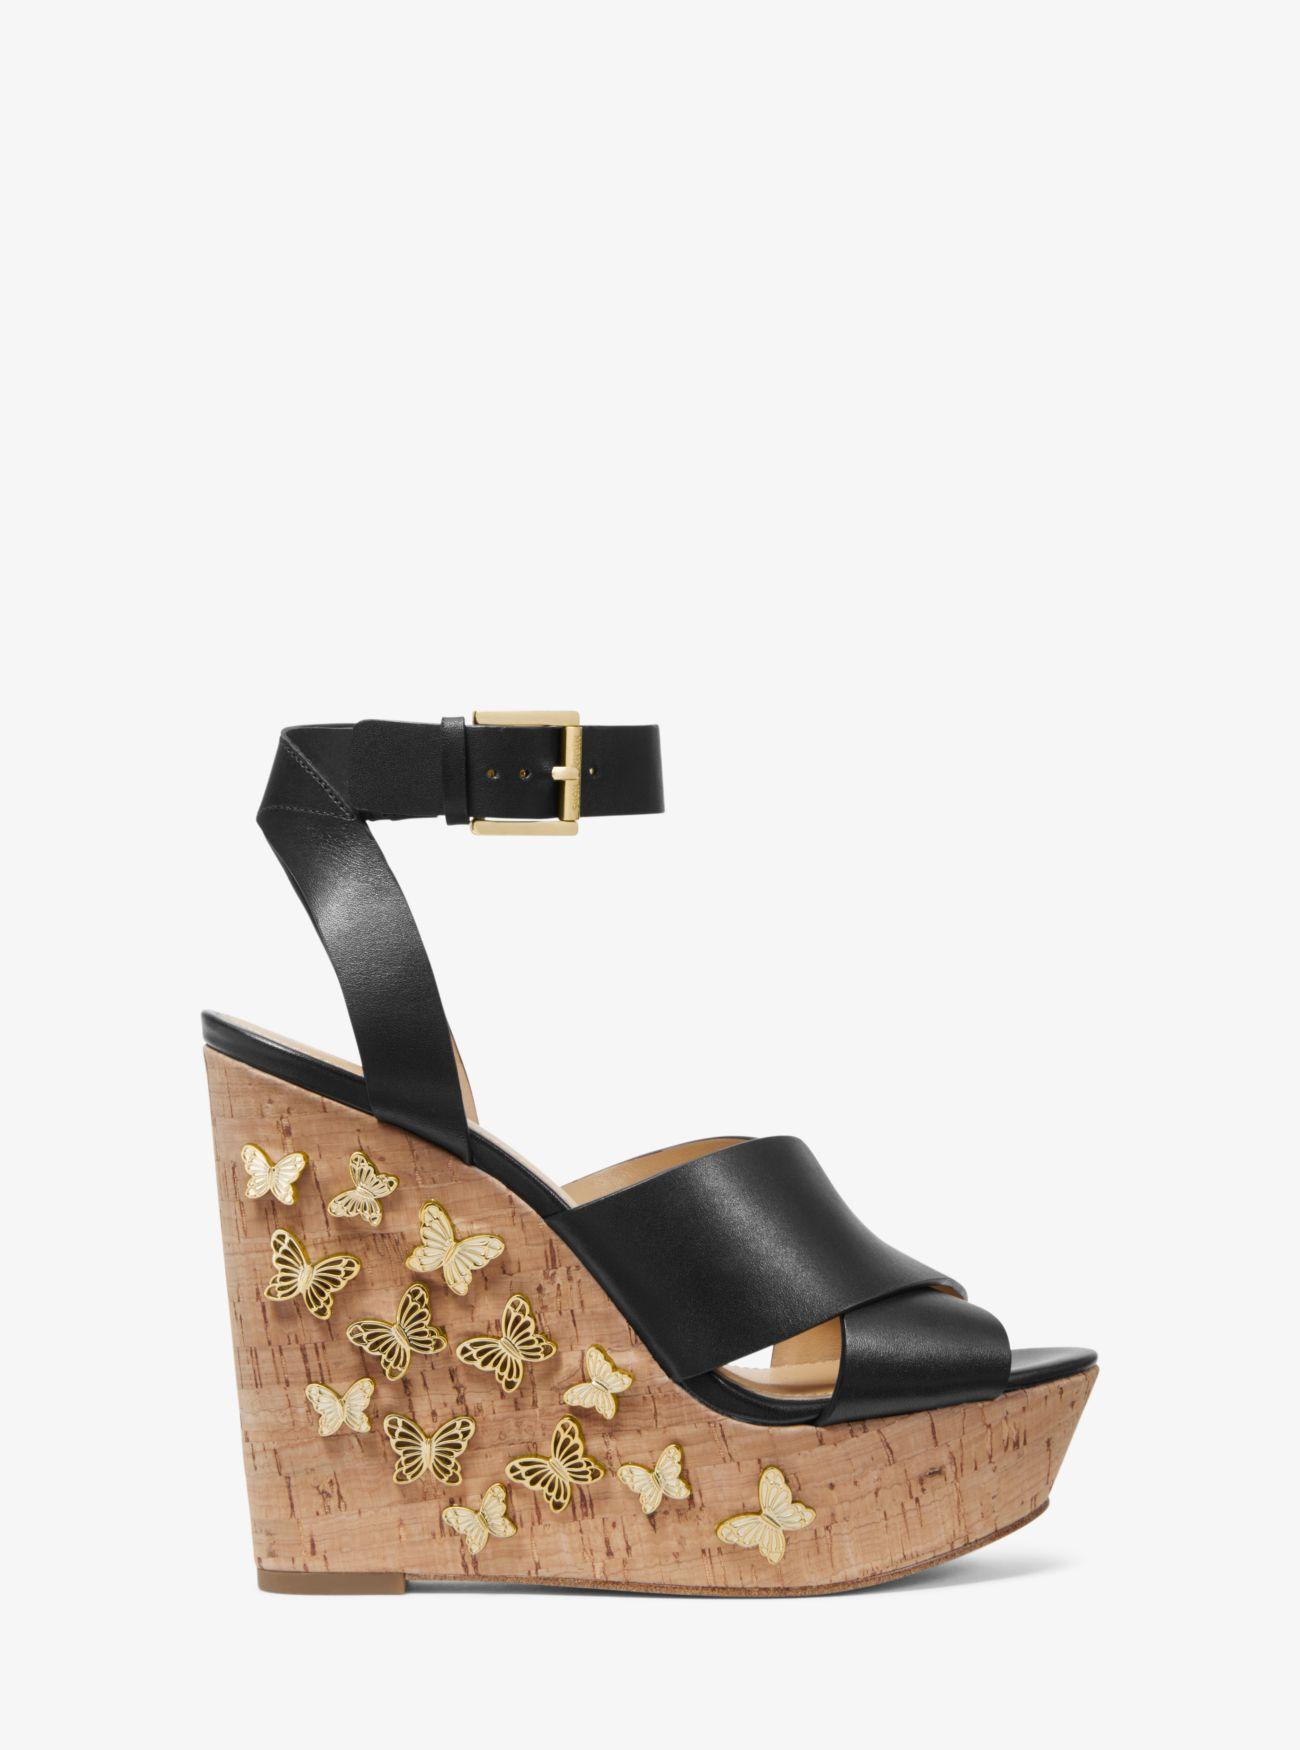 michael kors butterfly wedges